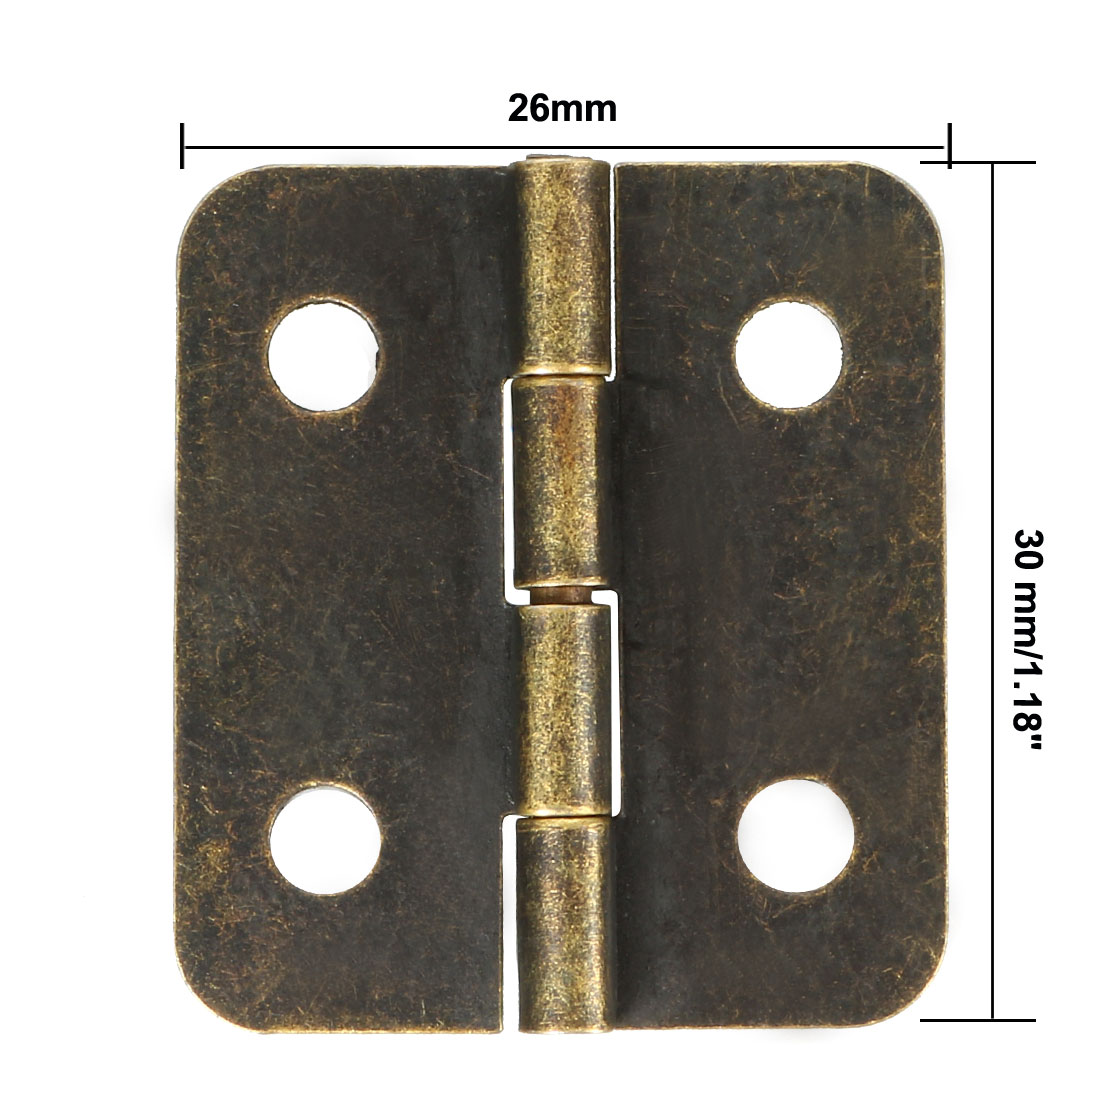 Uxcell 1.18" Antique Bronze  Hinges Retro  Hinge Replacement with Screws 10pcs - image 3 of 5